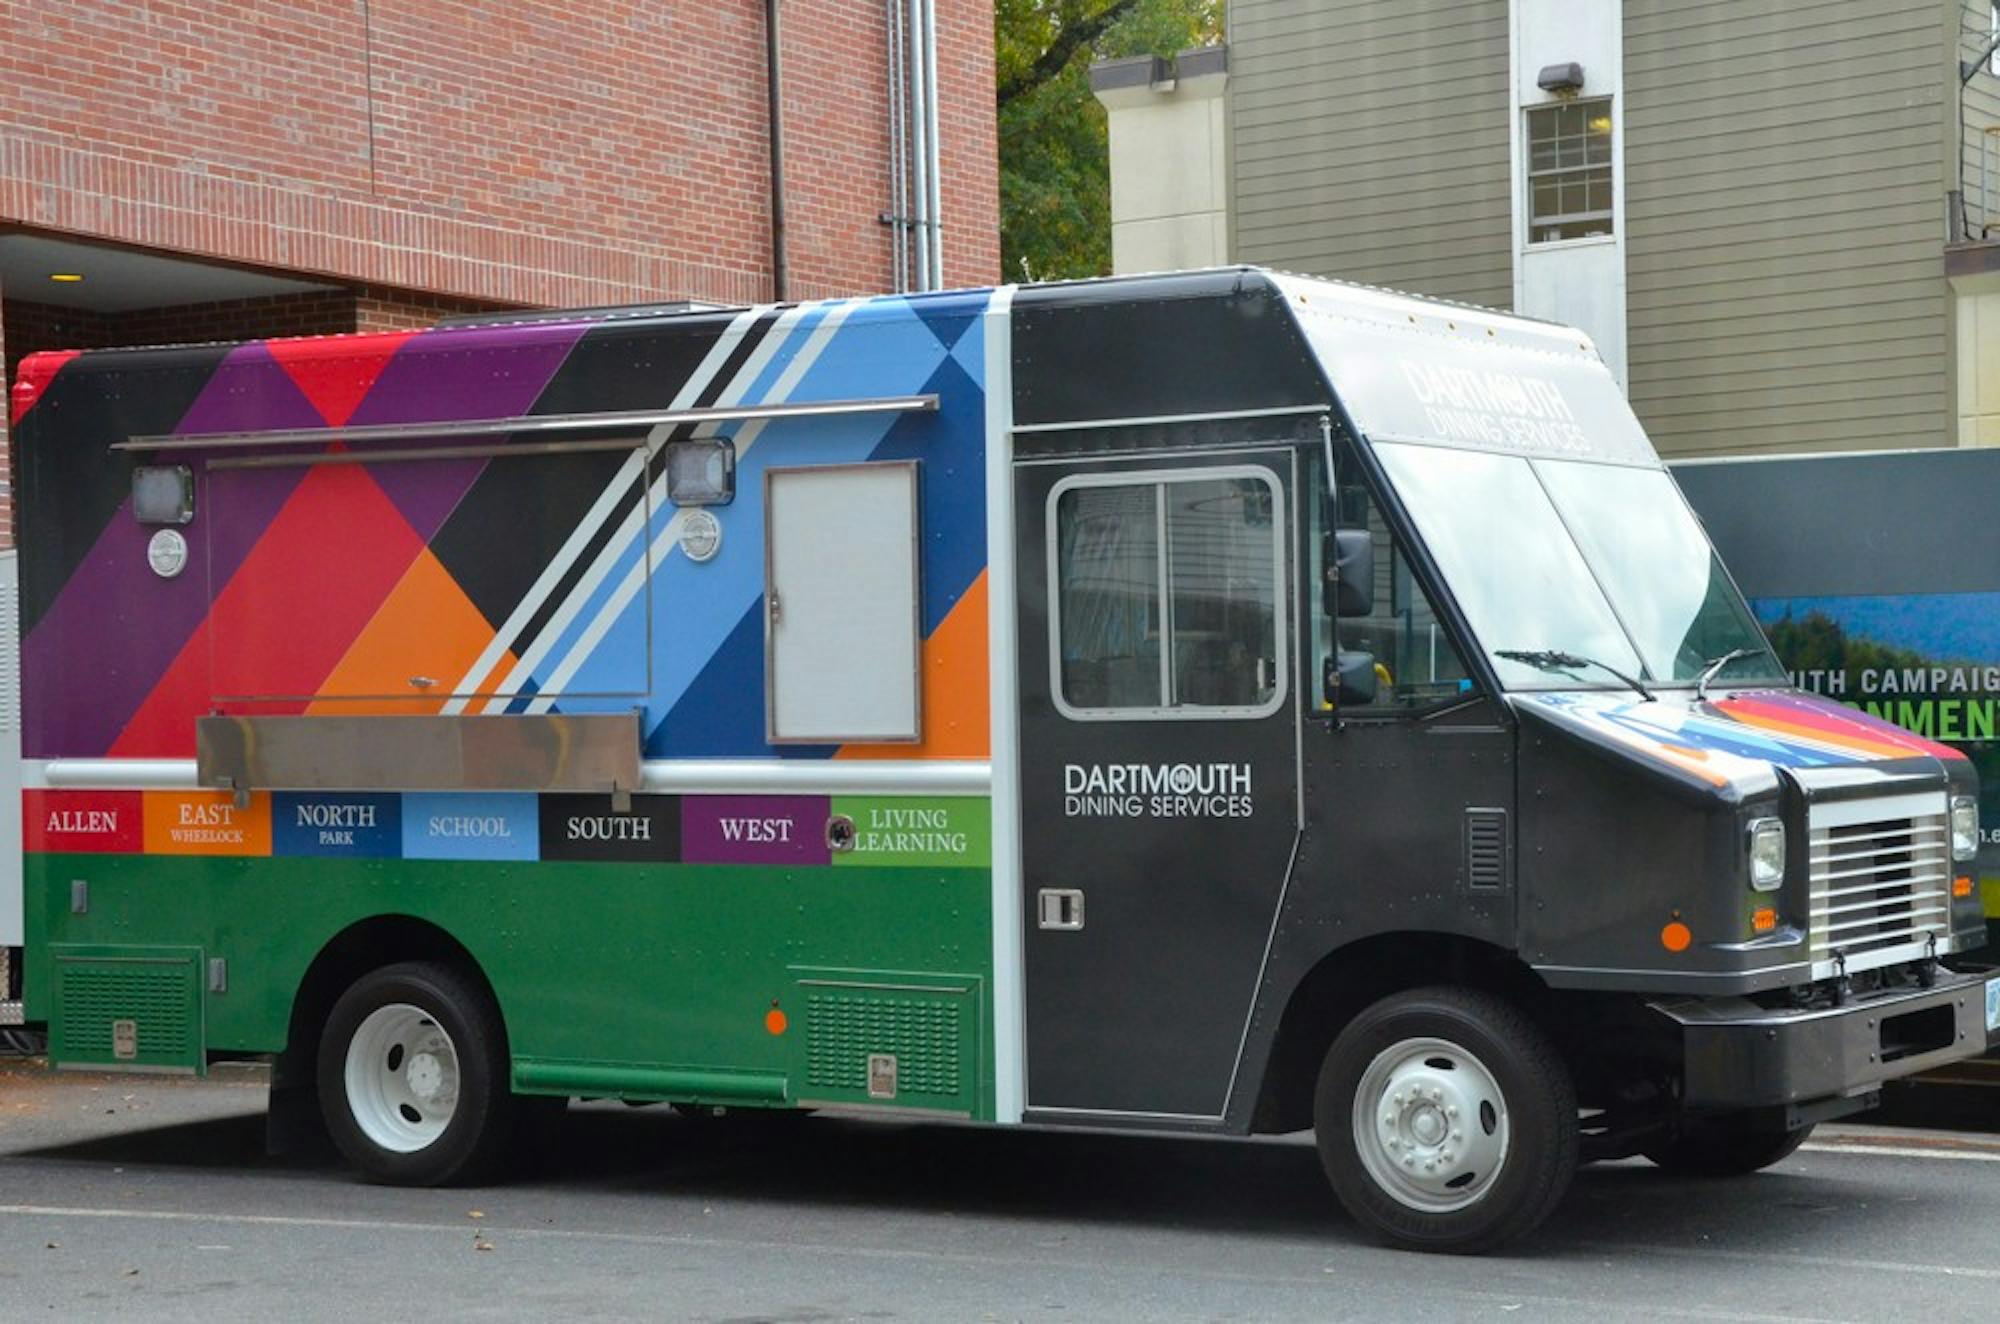 The Dartmouth Dining Services food truck offers a new menu this winter.